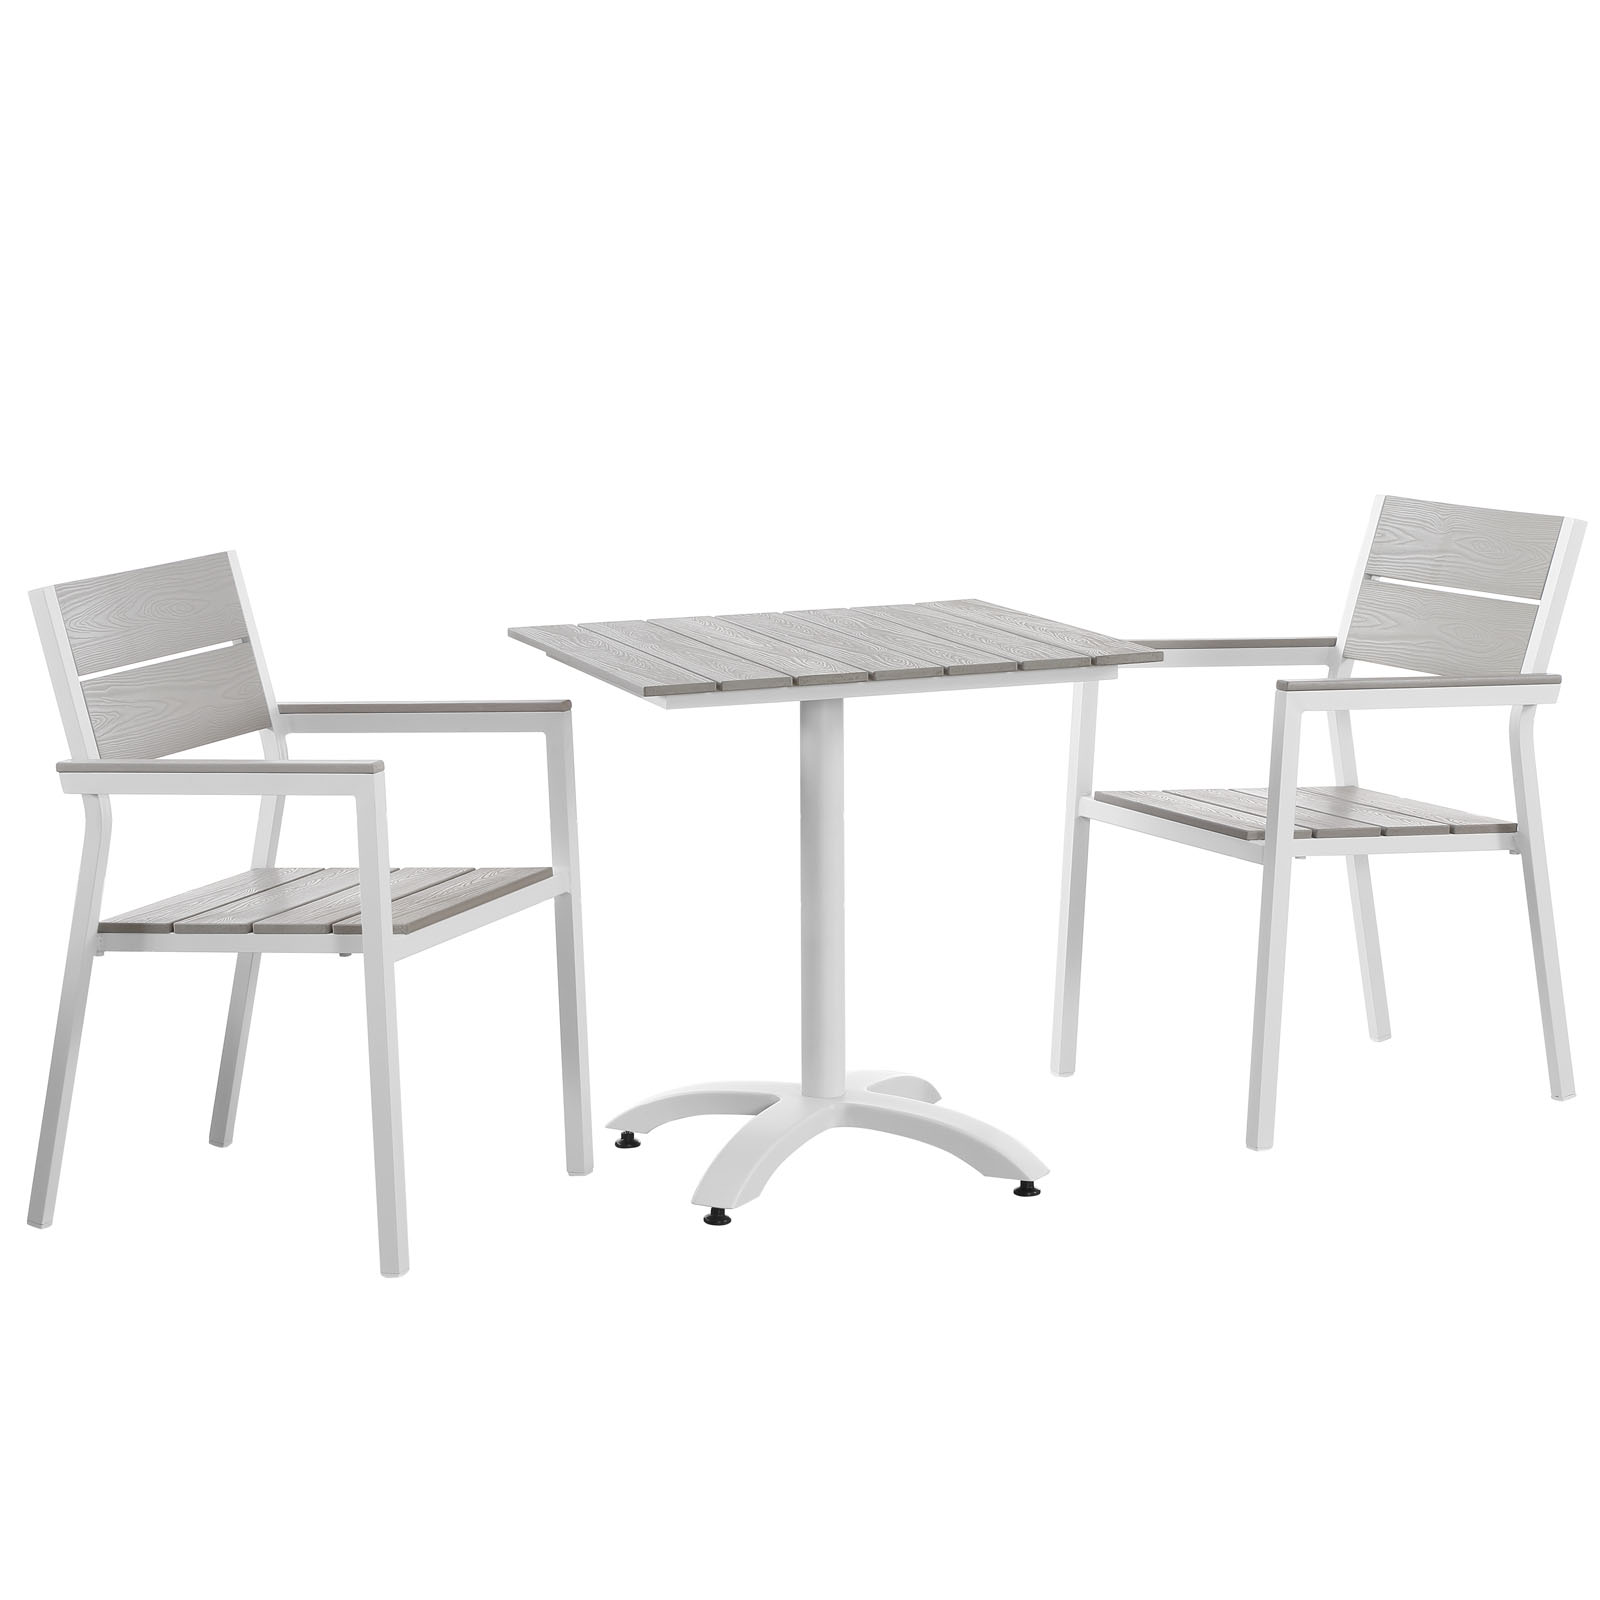 Modway Maine 3 Piece Outdoor Patio Dining Set in White Light Gray - image 2 of 7